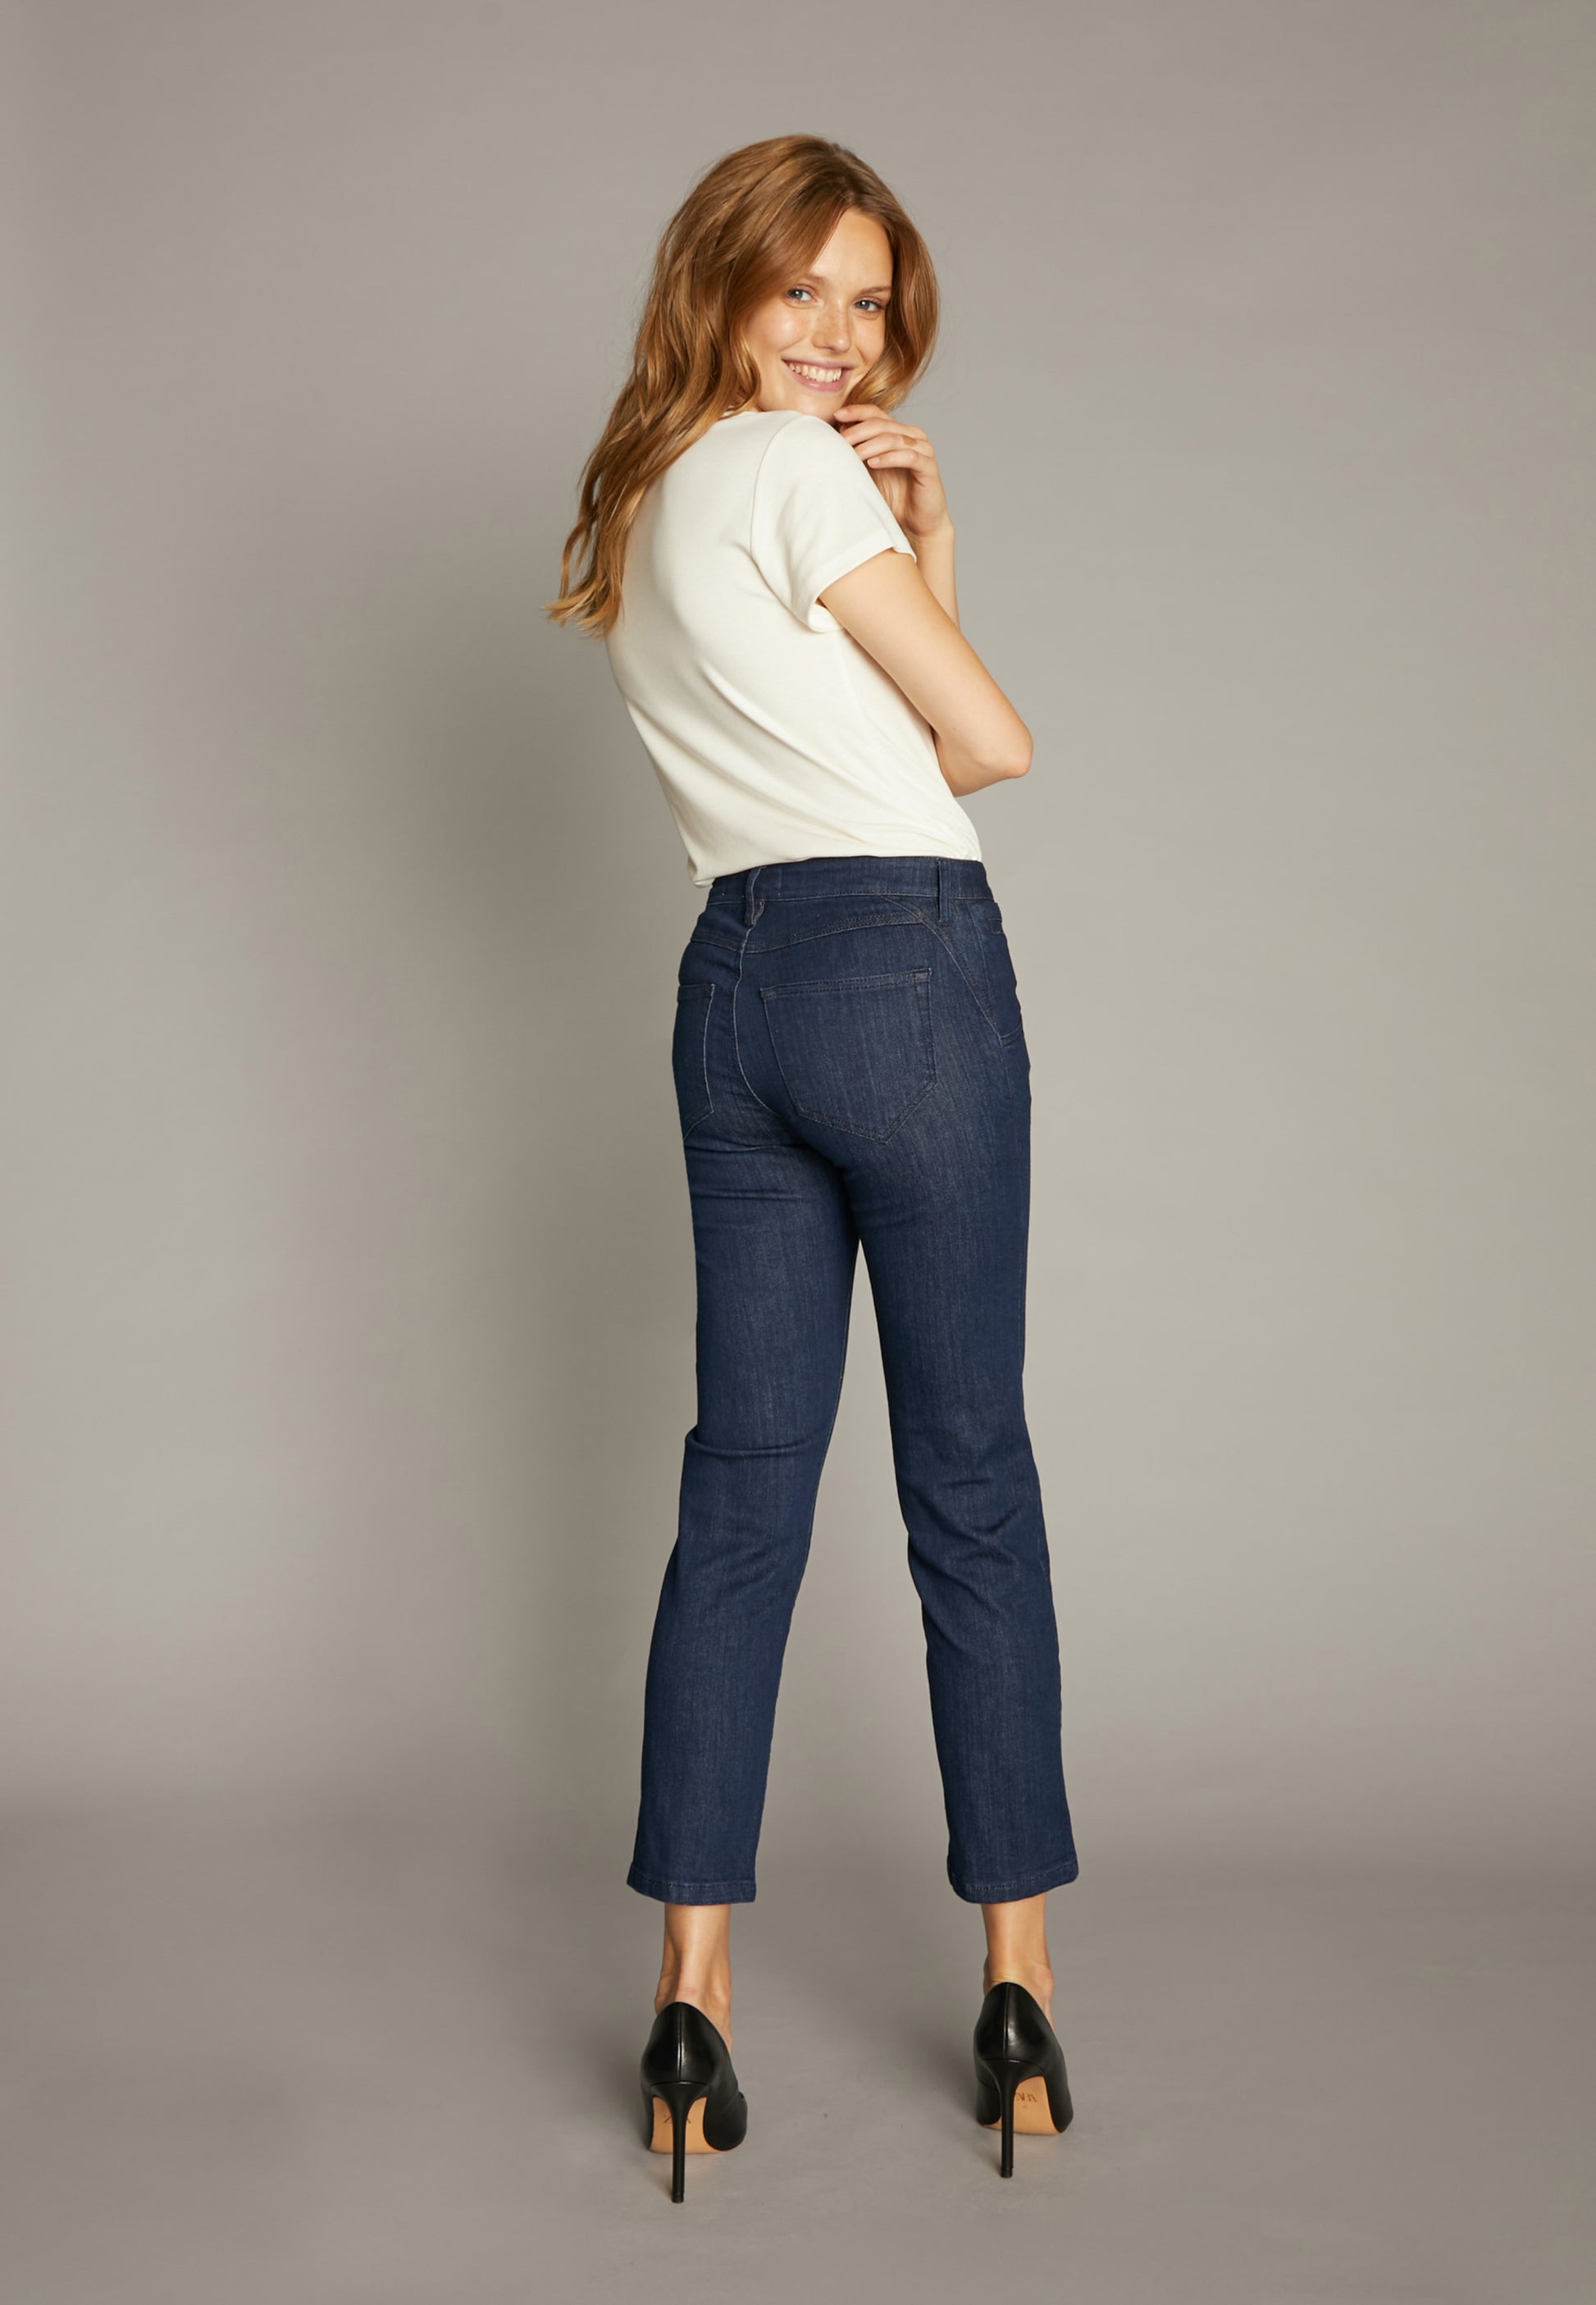 ECHTE Classic Jeans, Cropped Trousers 03022 Navy